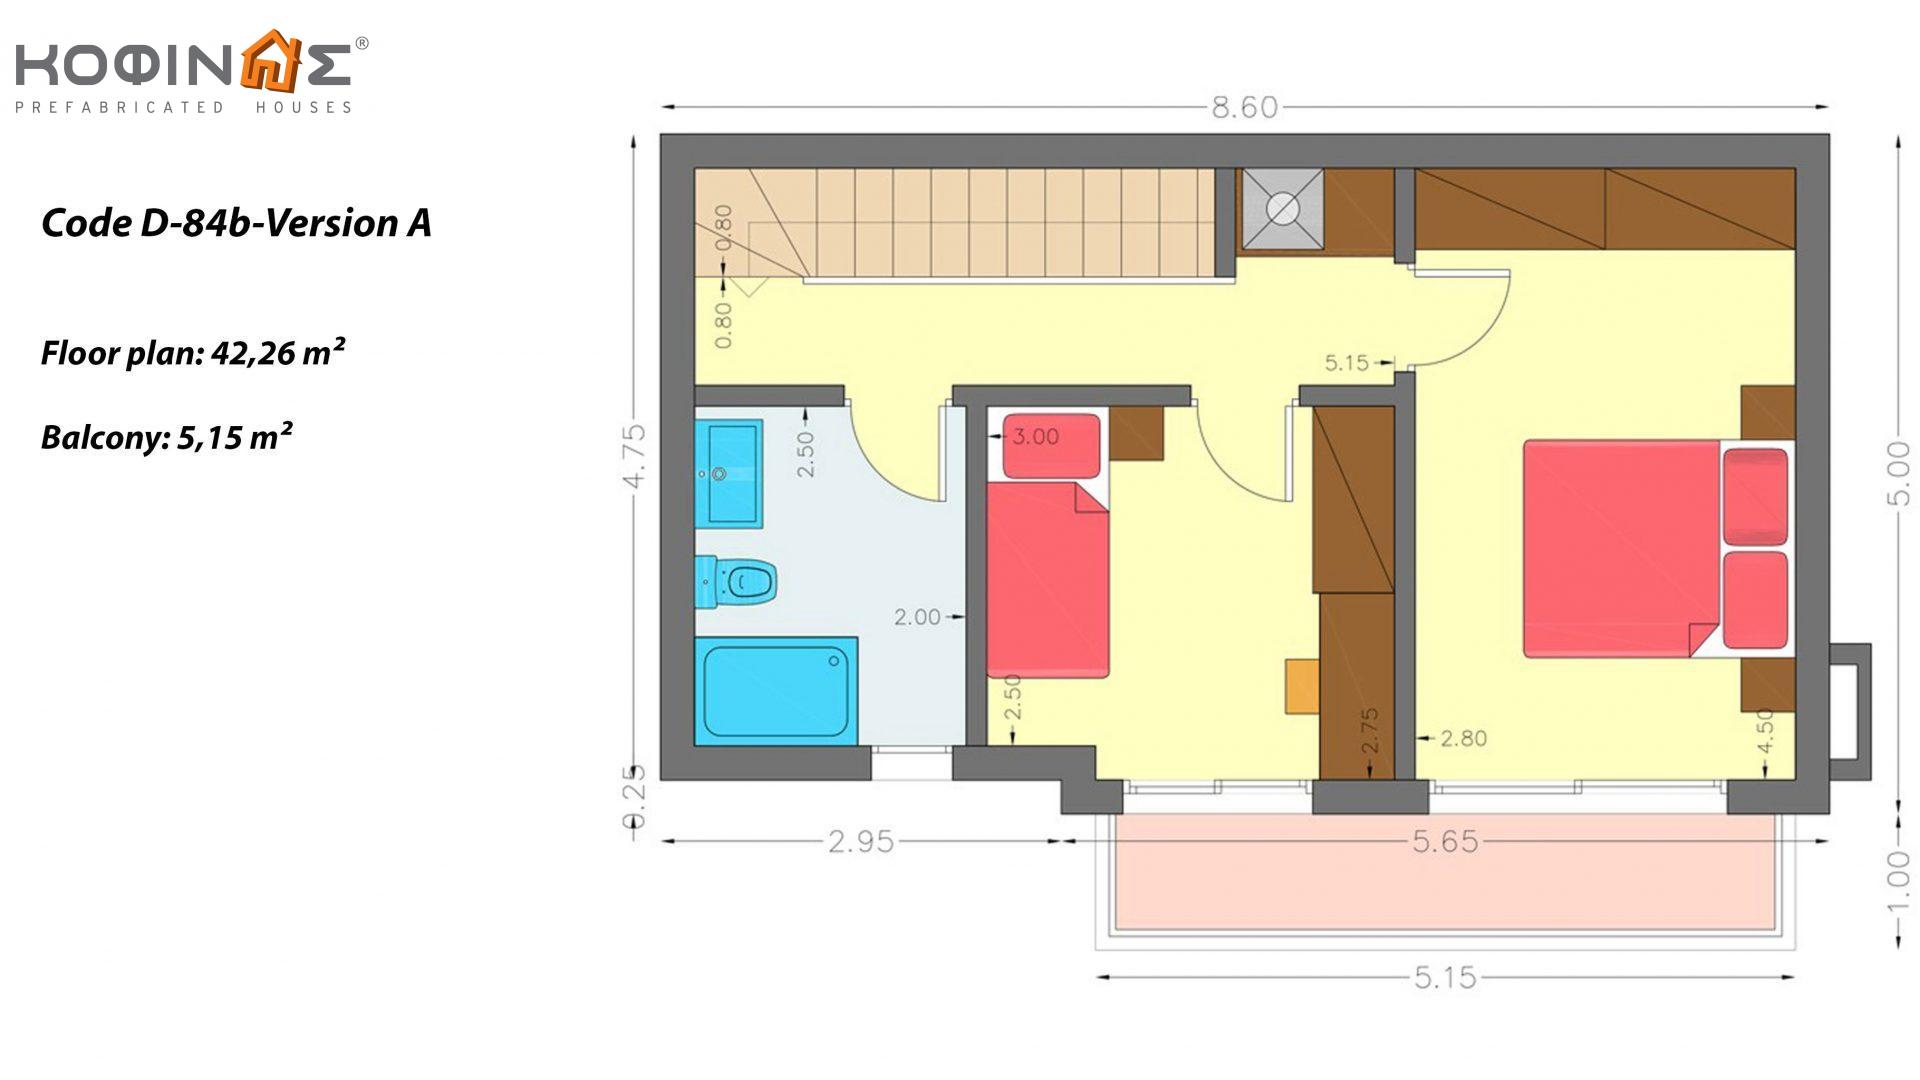 2-story house D-84b, total surface of 84,52 m²,roofed areas 5.15 m²,balconies 5.15 m²